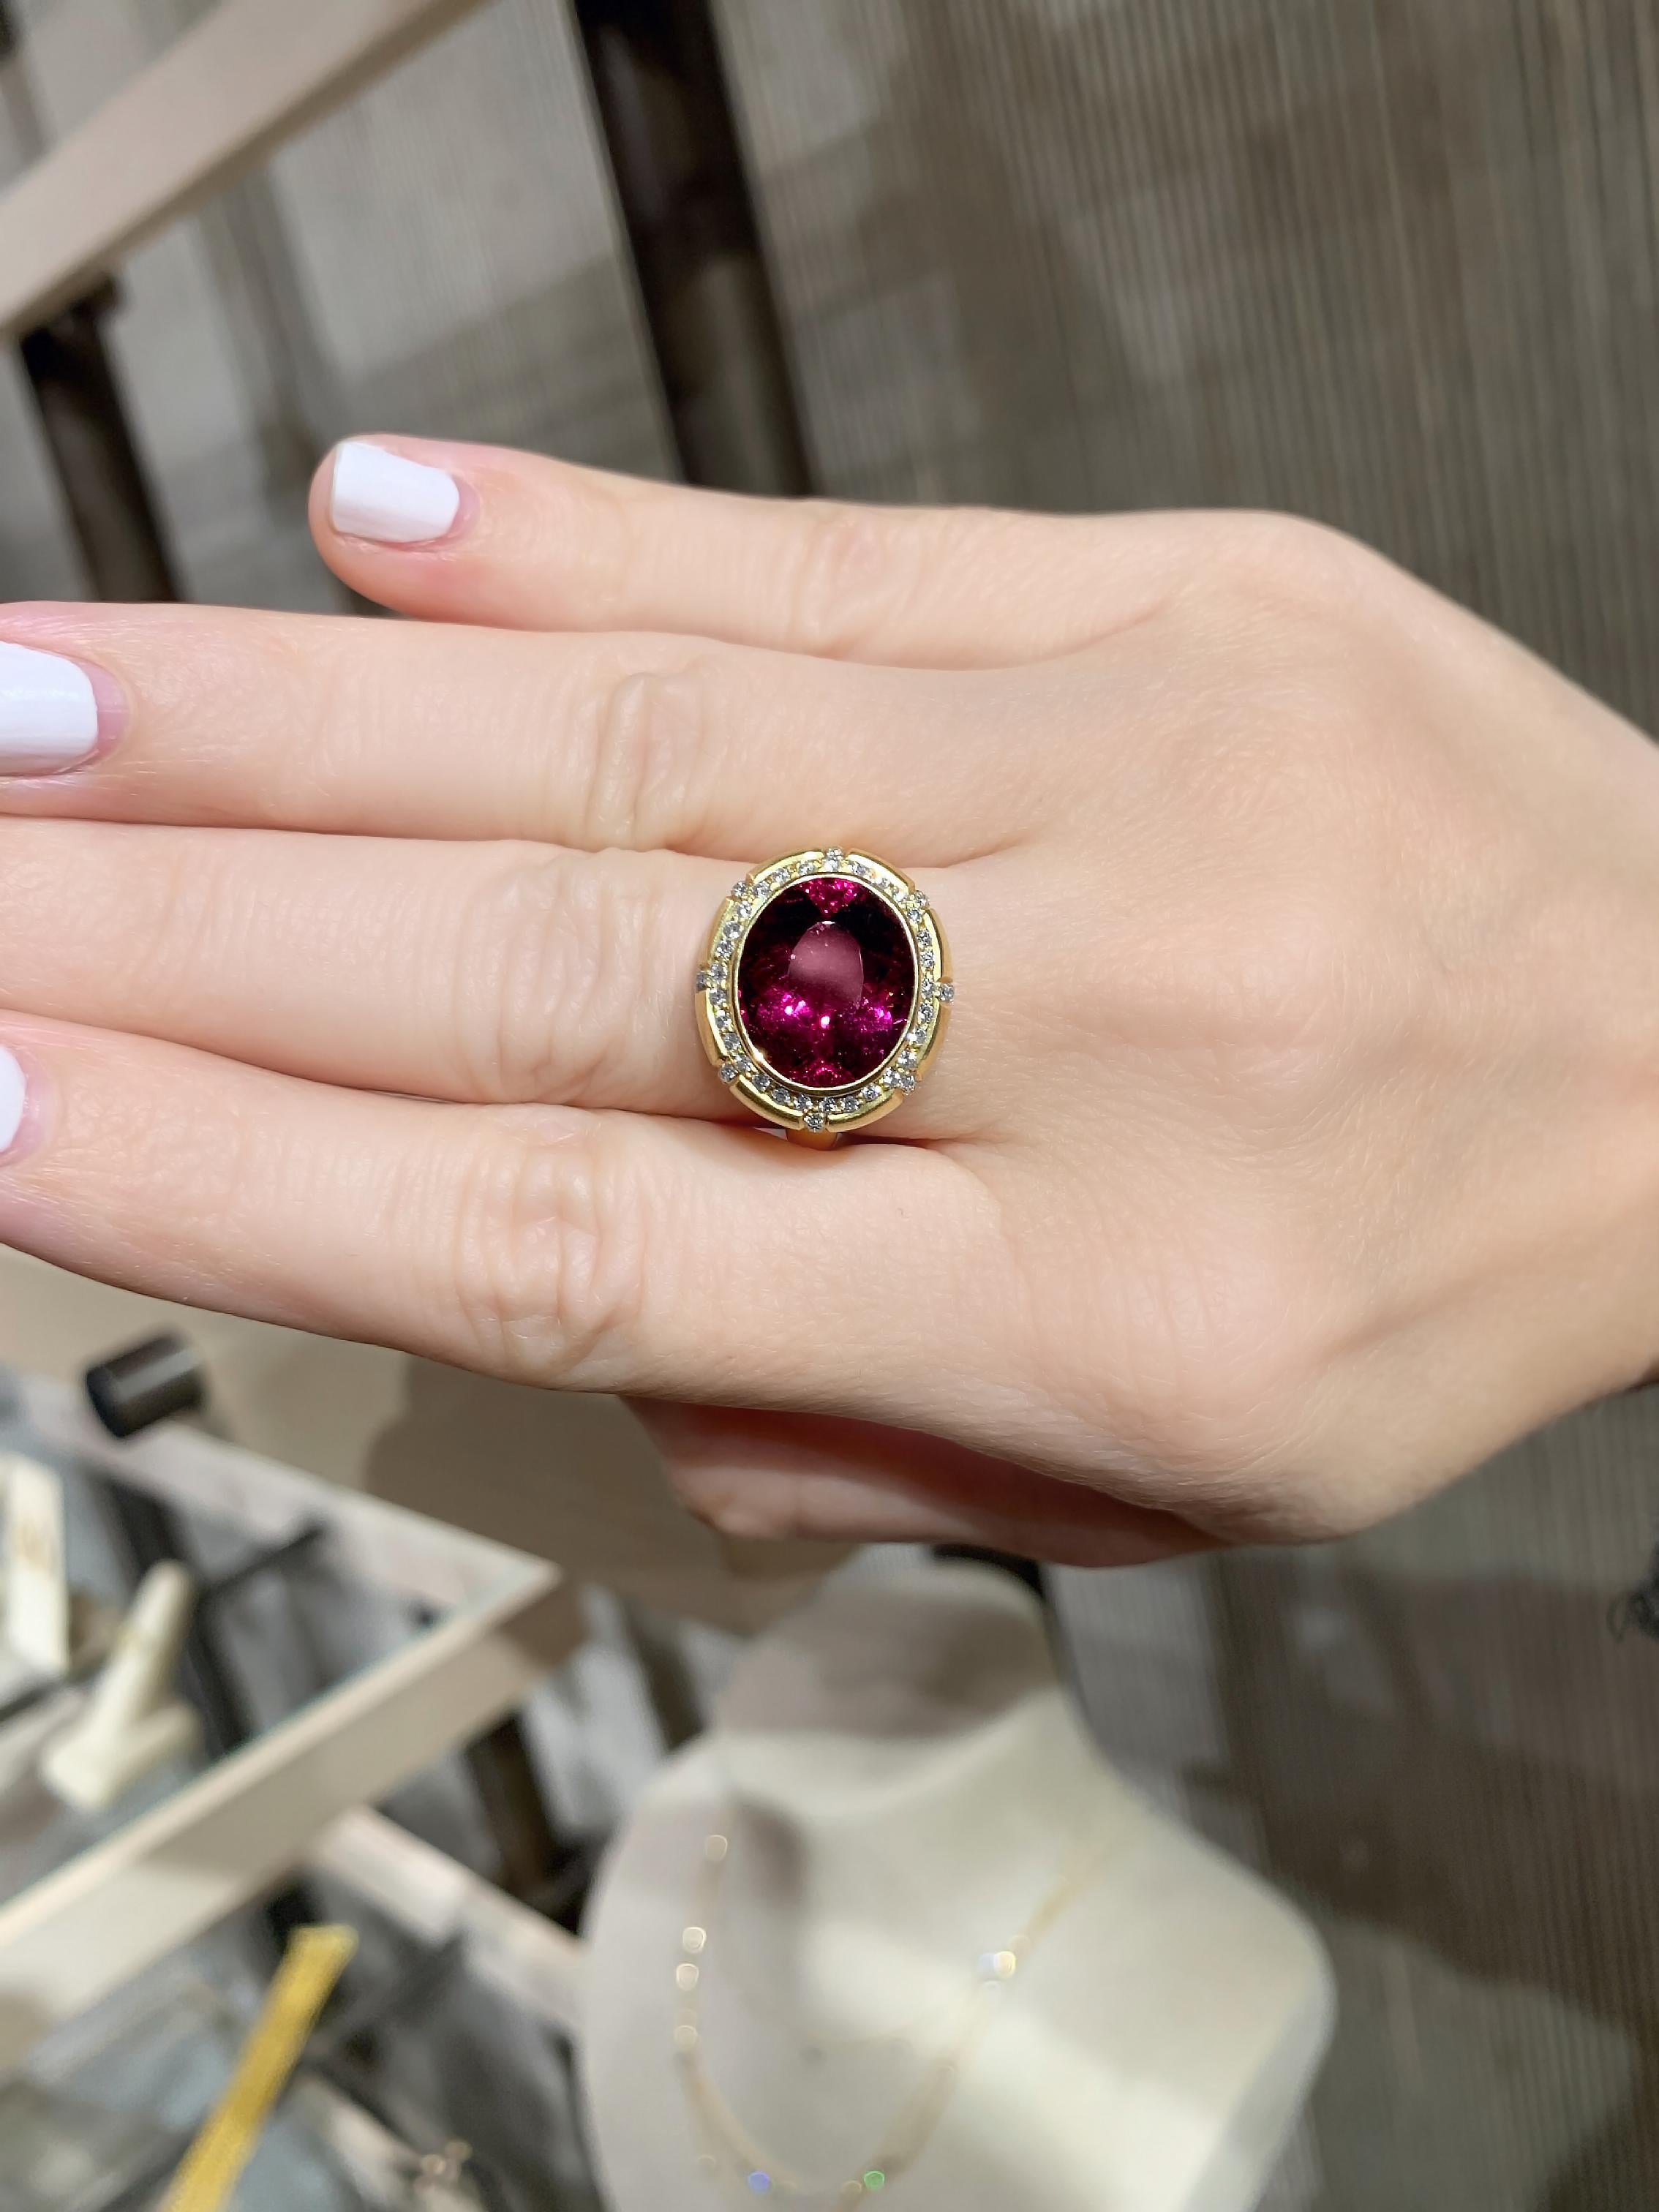 One of a Kind Queen's Crown Ring intricately hand-fabricated in satin-finished 18k yellow gold by jewelry artist Tej Kothari featuring a shimmering, vivid rubelite tourmaline faceted oval surrounded and accented by 0.46 total carats of round